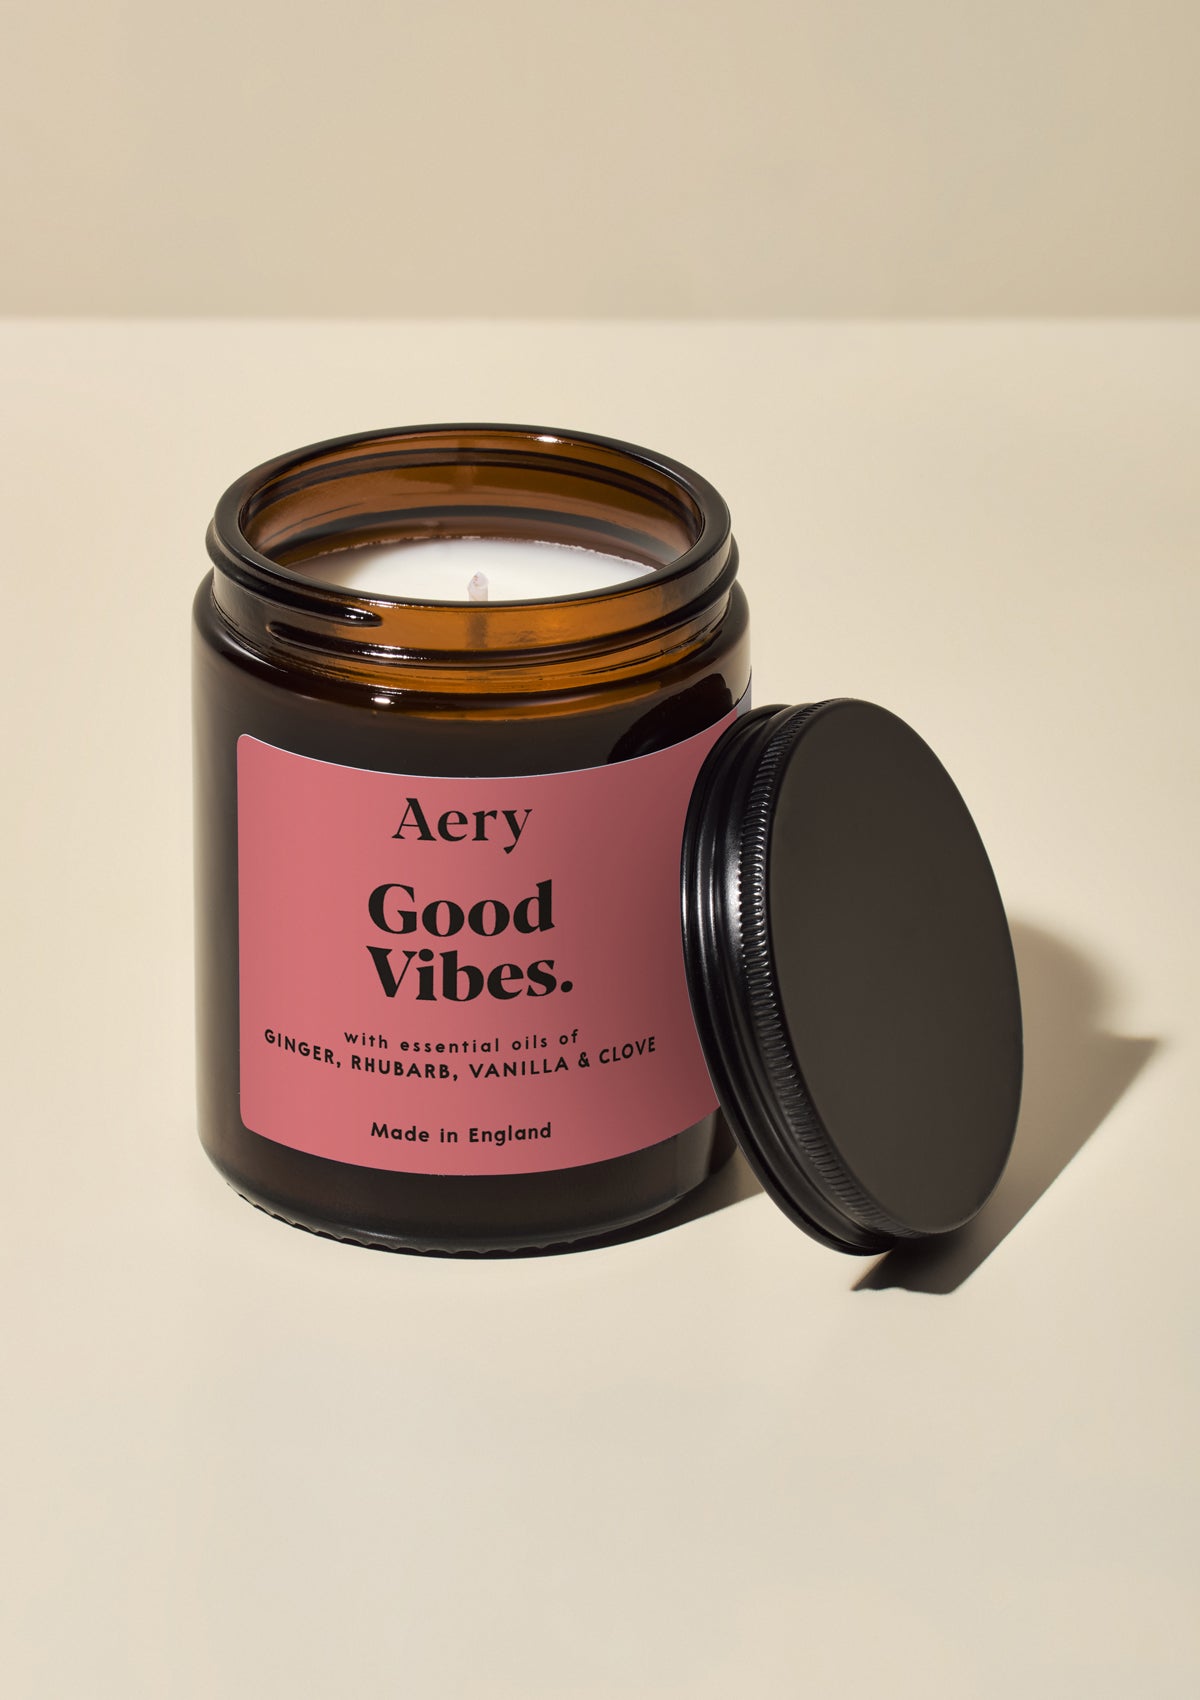 Good Vibes Scented Jar Candle